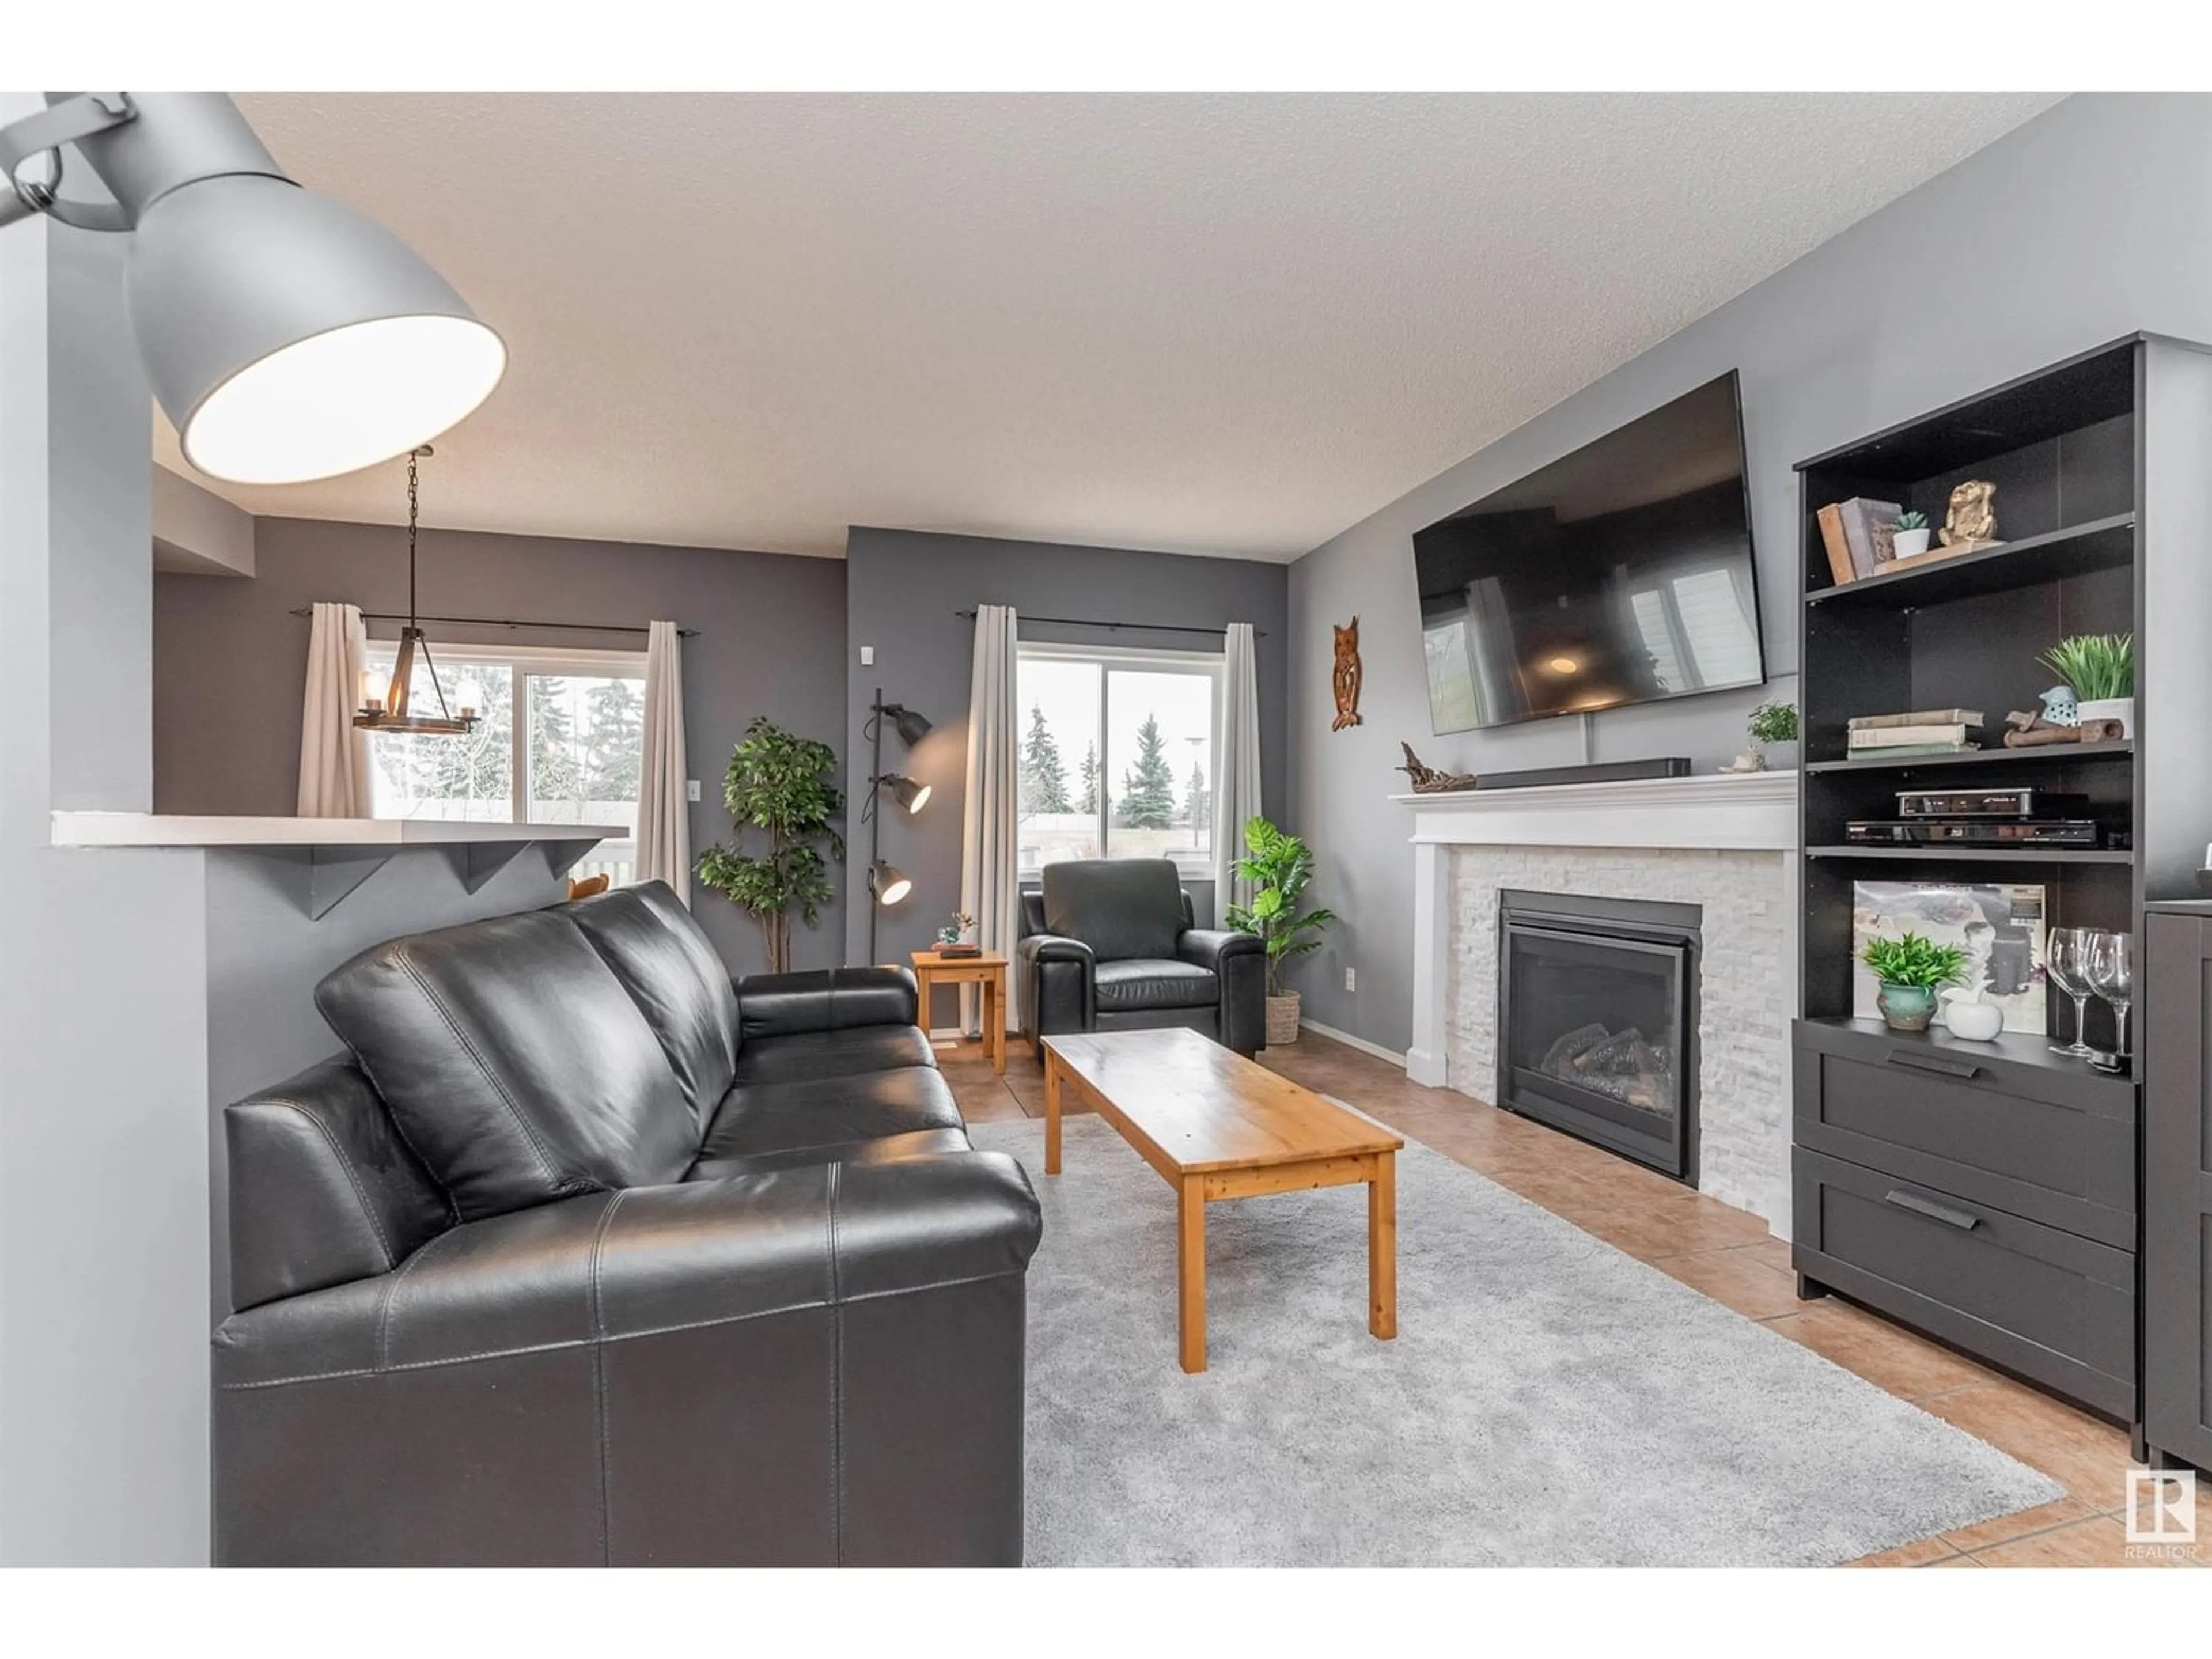 Living room for #23 843 YOUVILLE DR W NW, Edmonton Alberta T6L6X8